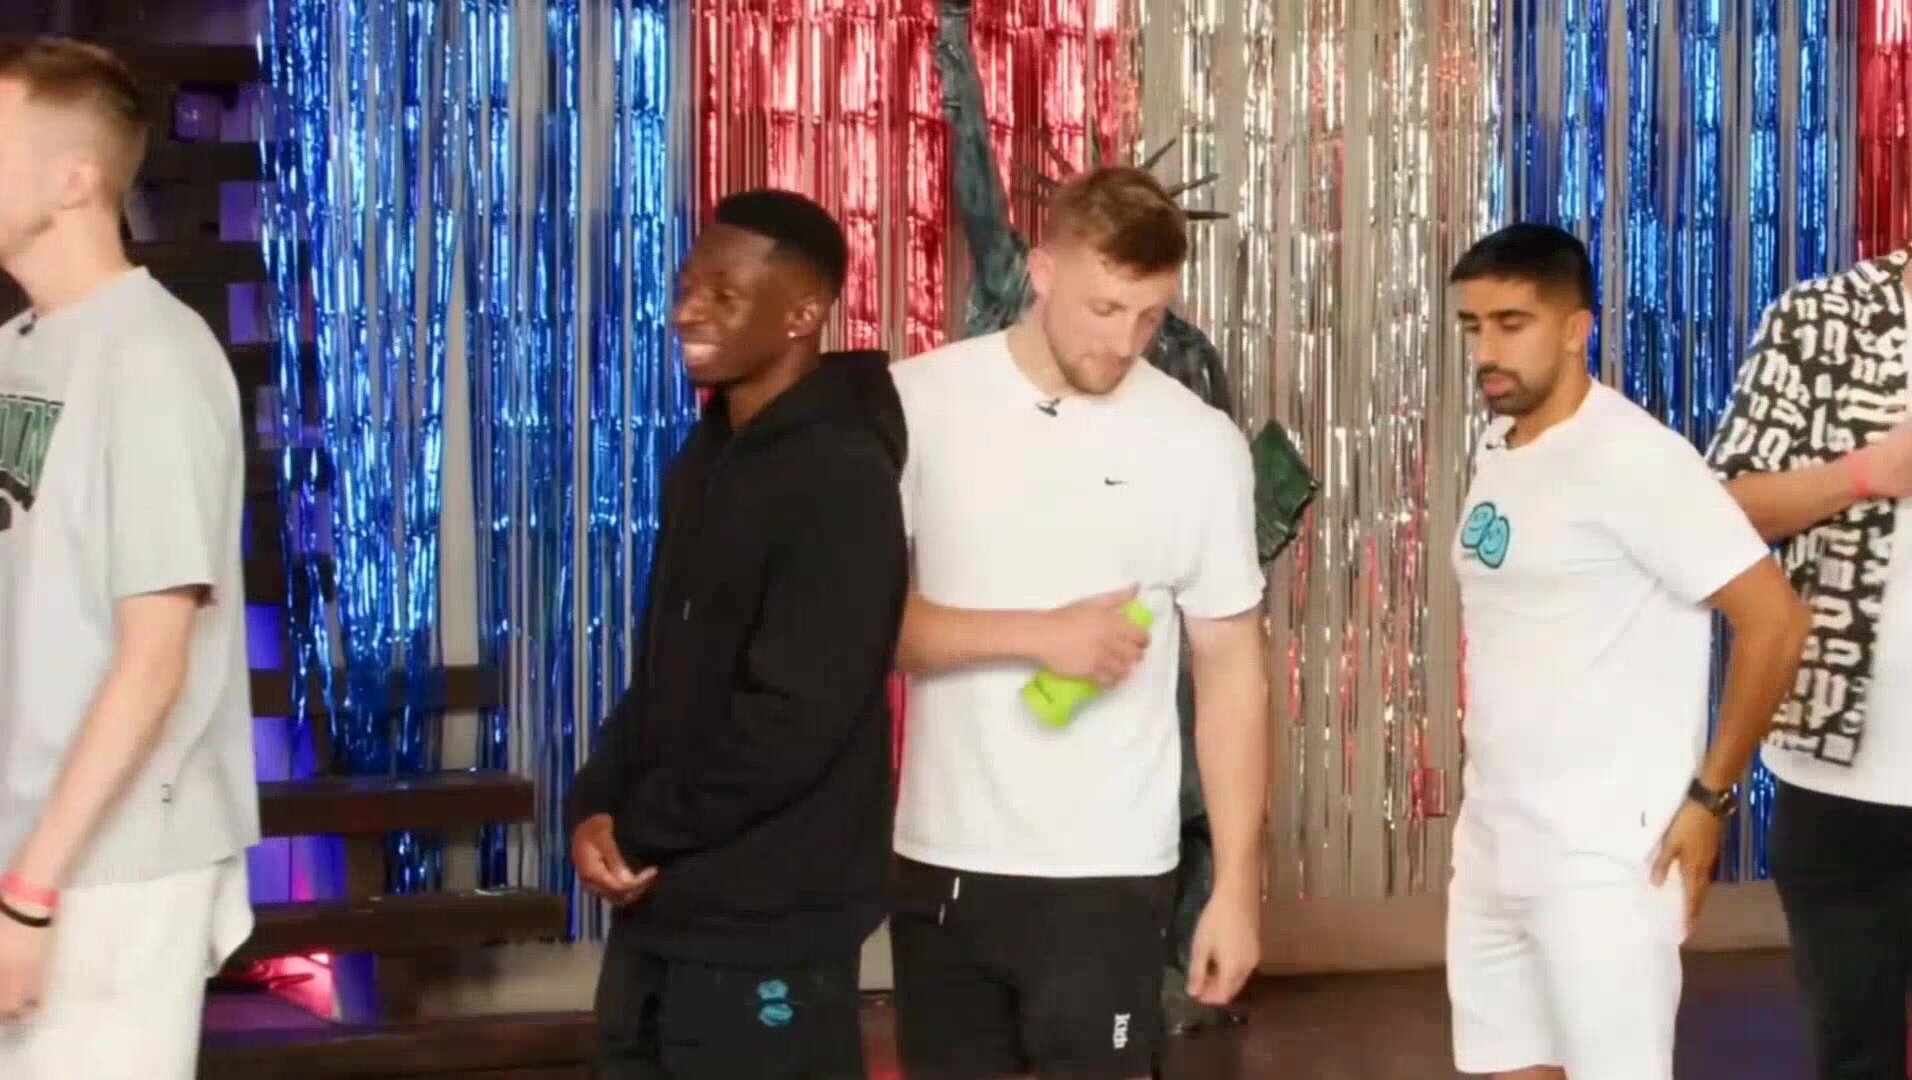 KSI gets her to flash her tits in sidemen YouTube video